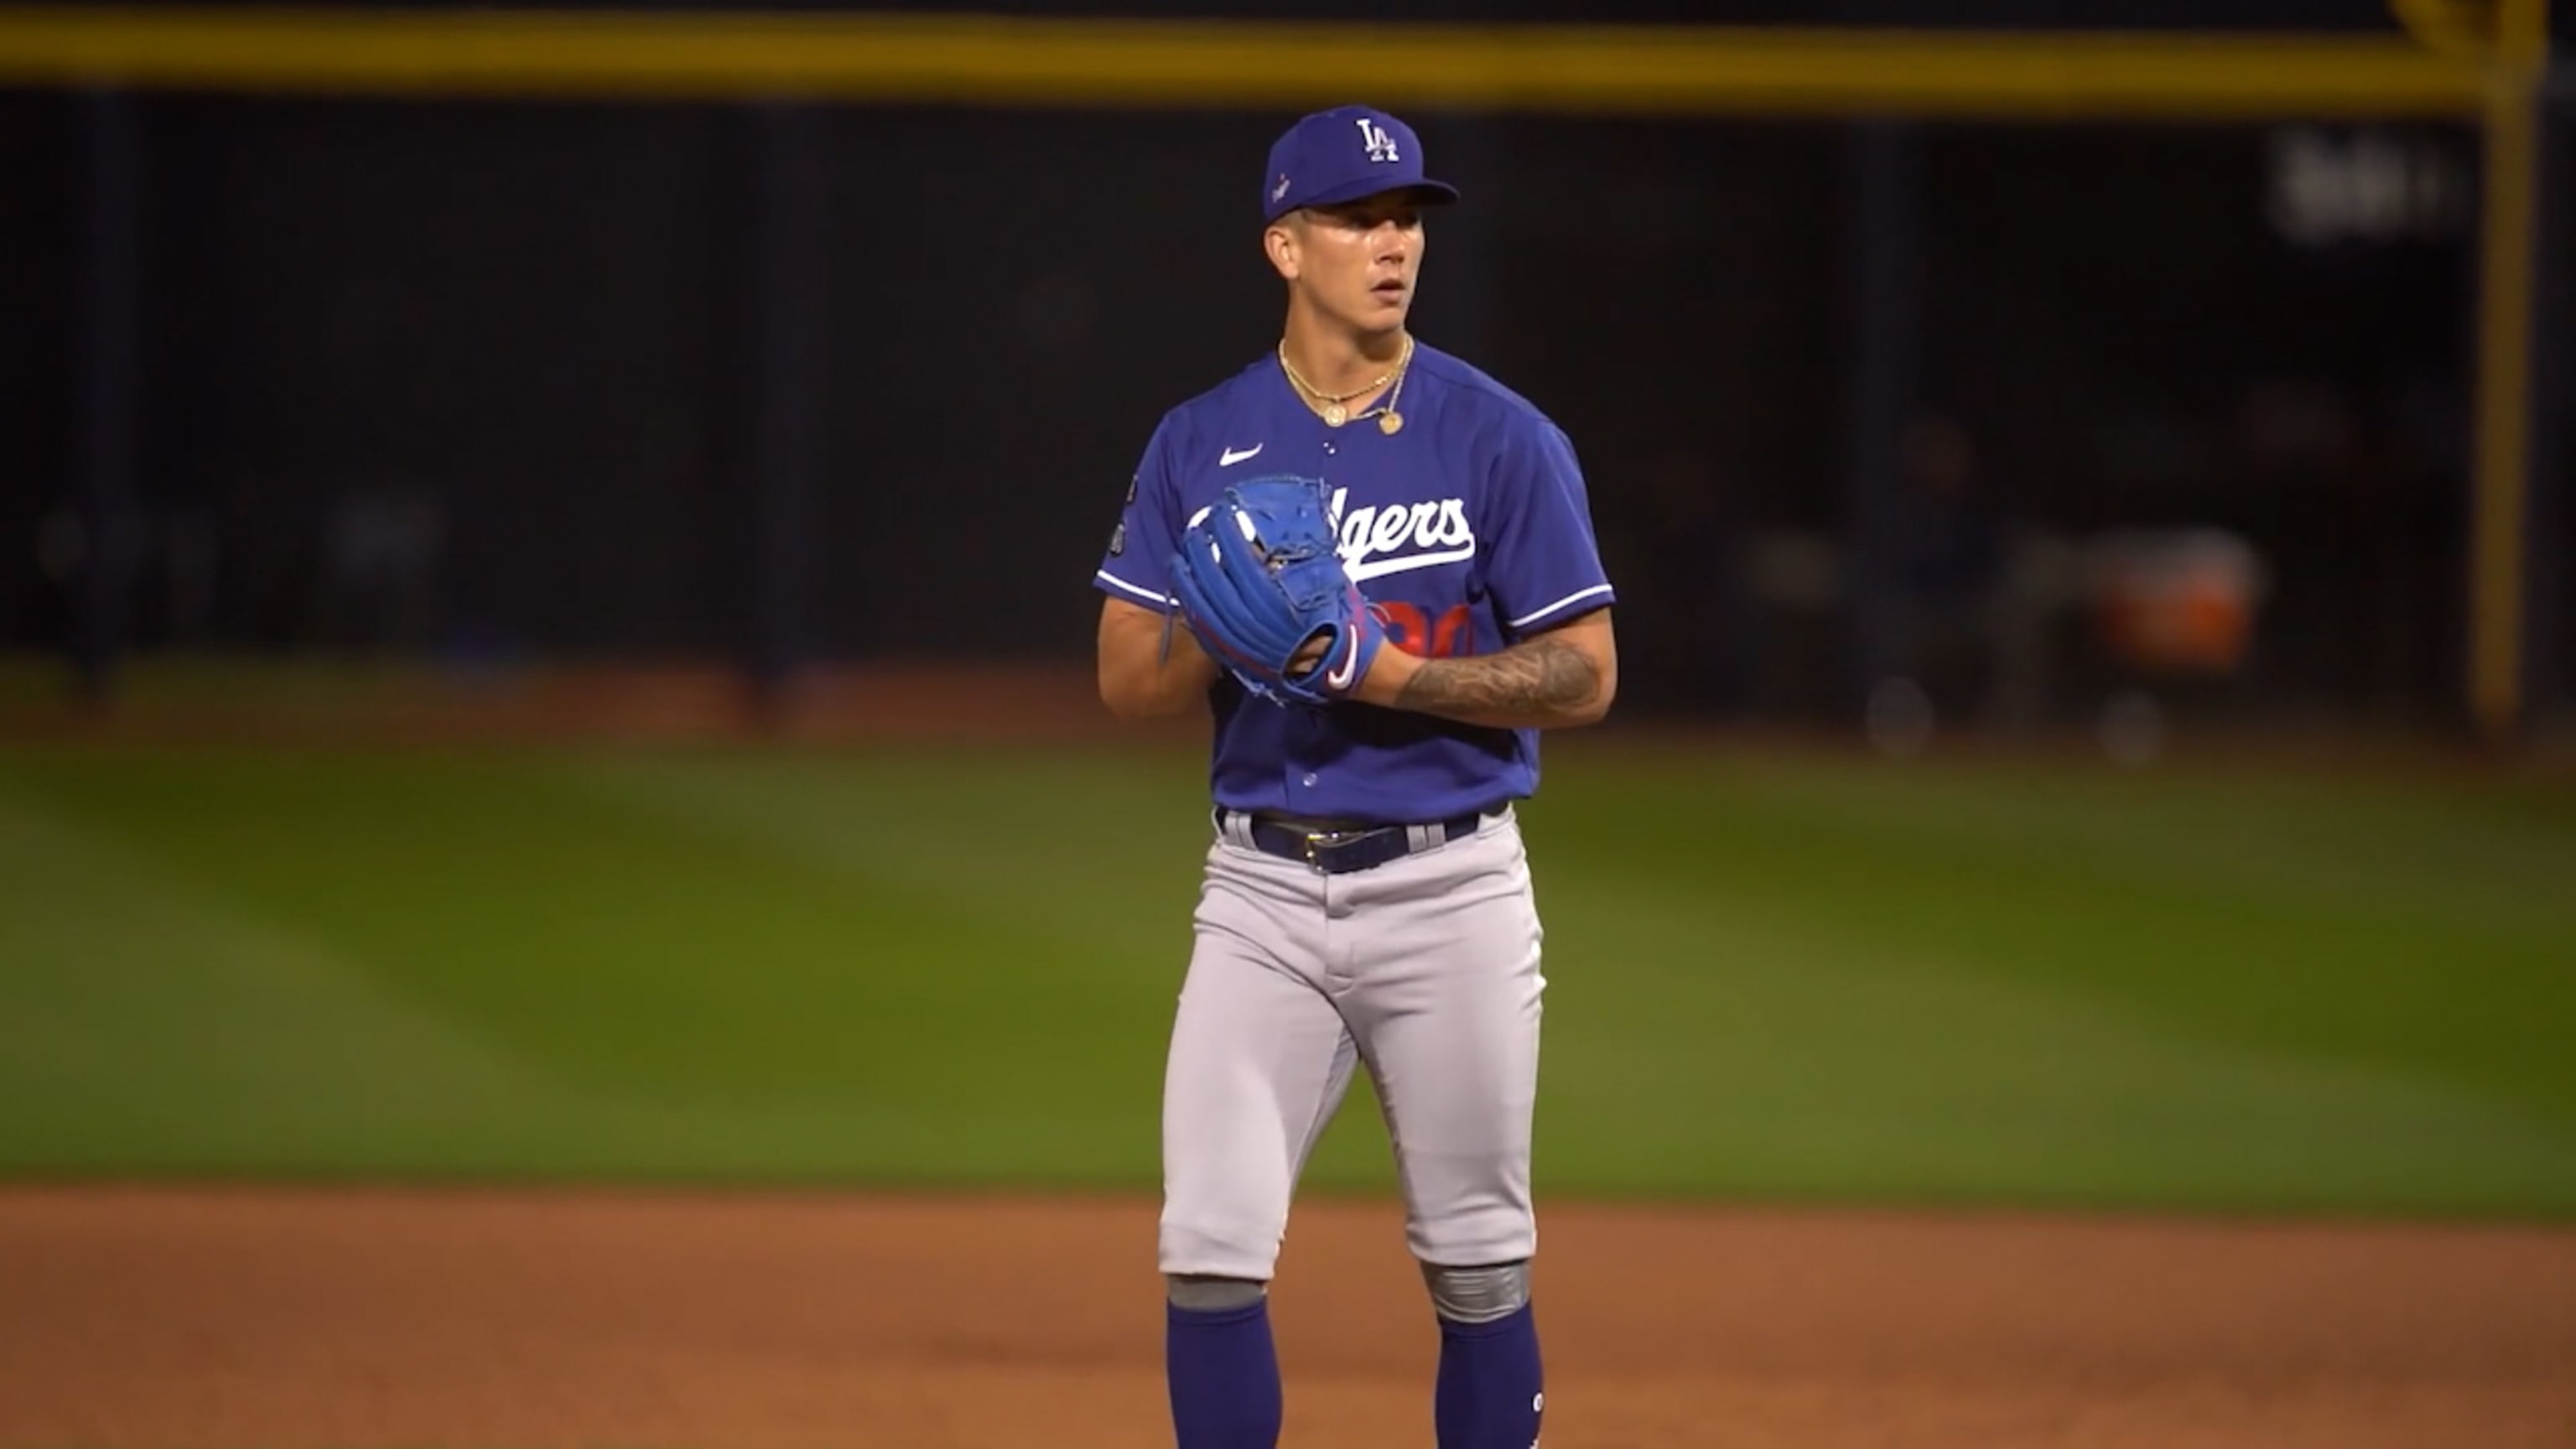 L.A. Dodgers' No. 1 prospect Diego Cartaya joins the Great Lakes Loons,  marking the first time the Loons have ever had the Dodgers' top prospect